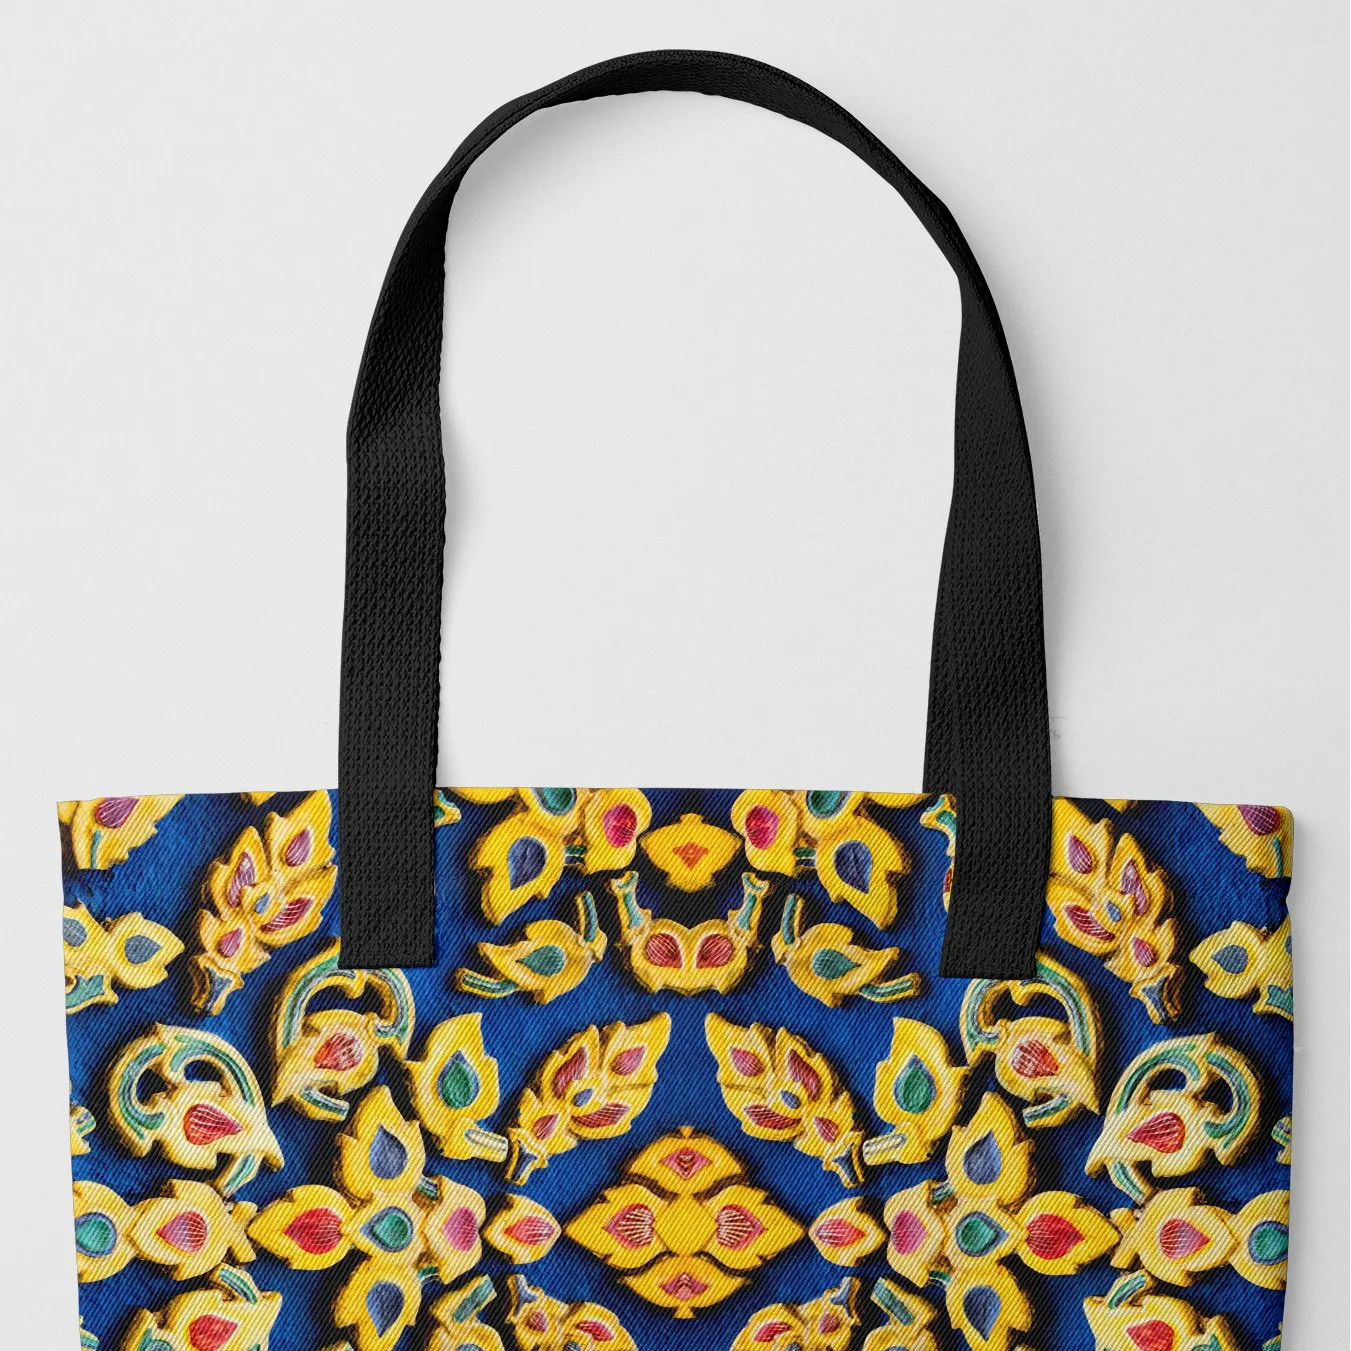 Entering Ayodhya Tote - Heavy Duty Reusable Grocery Bag - Black Handles - Shopping Totes - Aesthetic Art